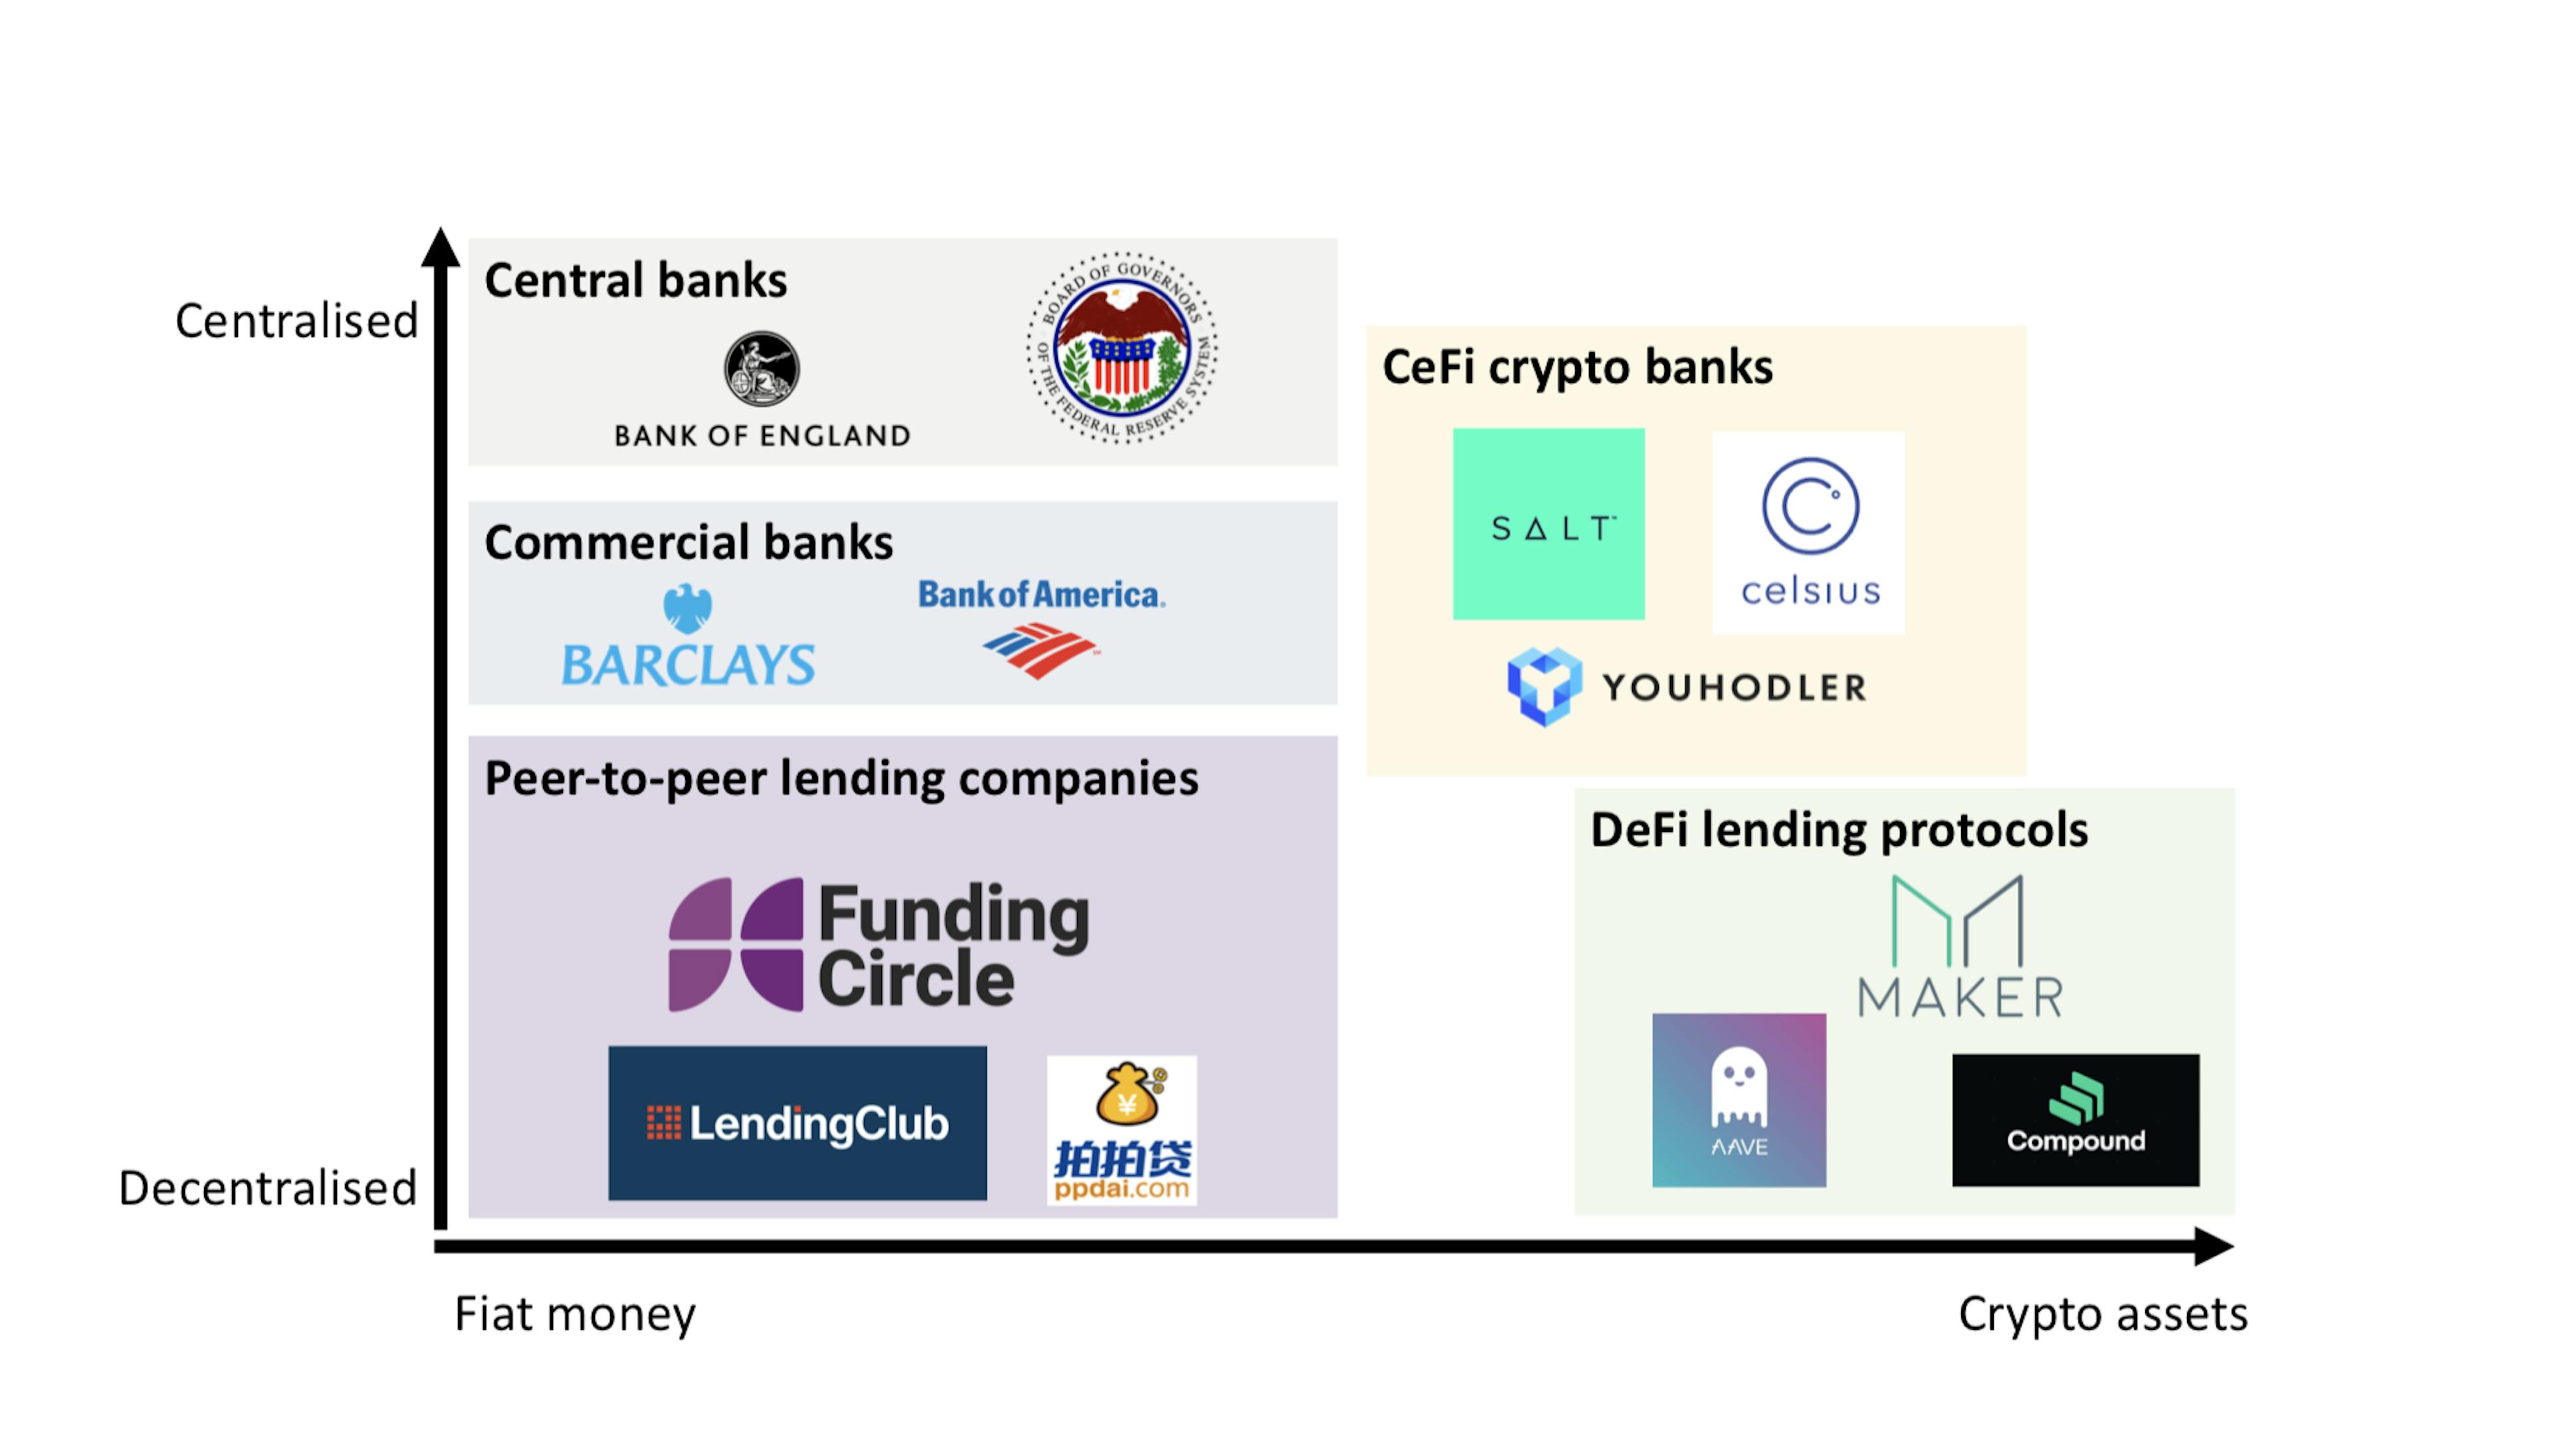 Source: From banks to DeFi: the evolution of the lending market by Jiahua Xu and Nikhil Vadgama